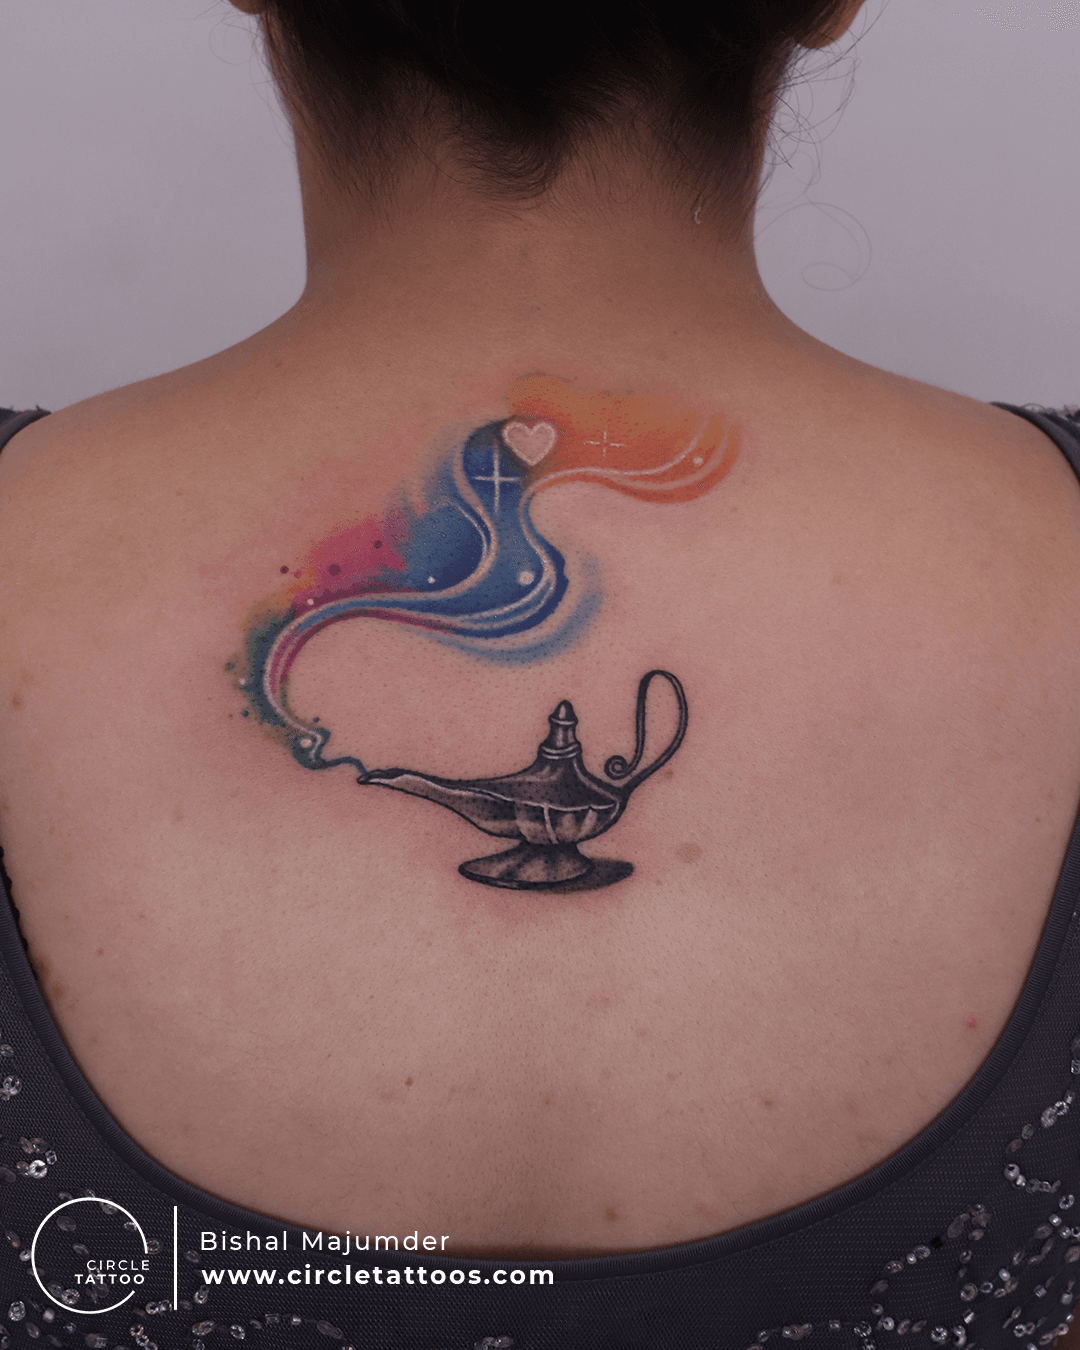 Genie lamp tattoo on the left side ribcage.